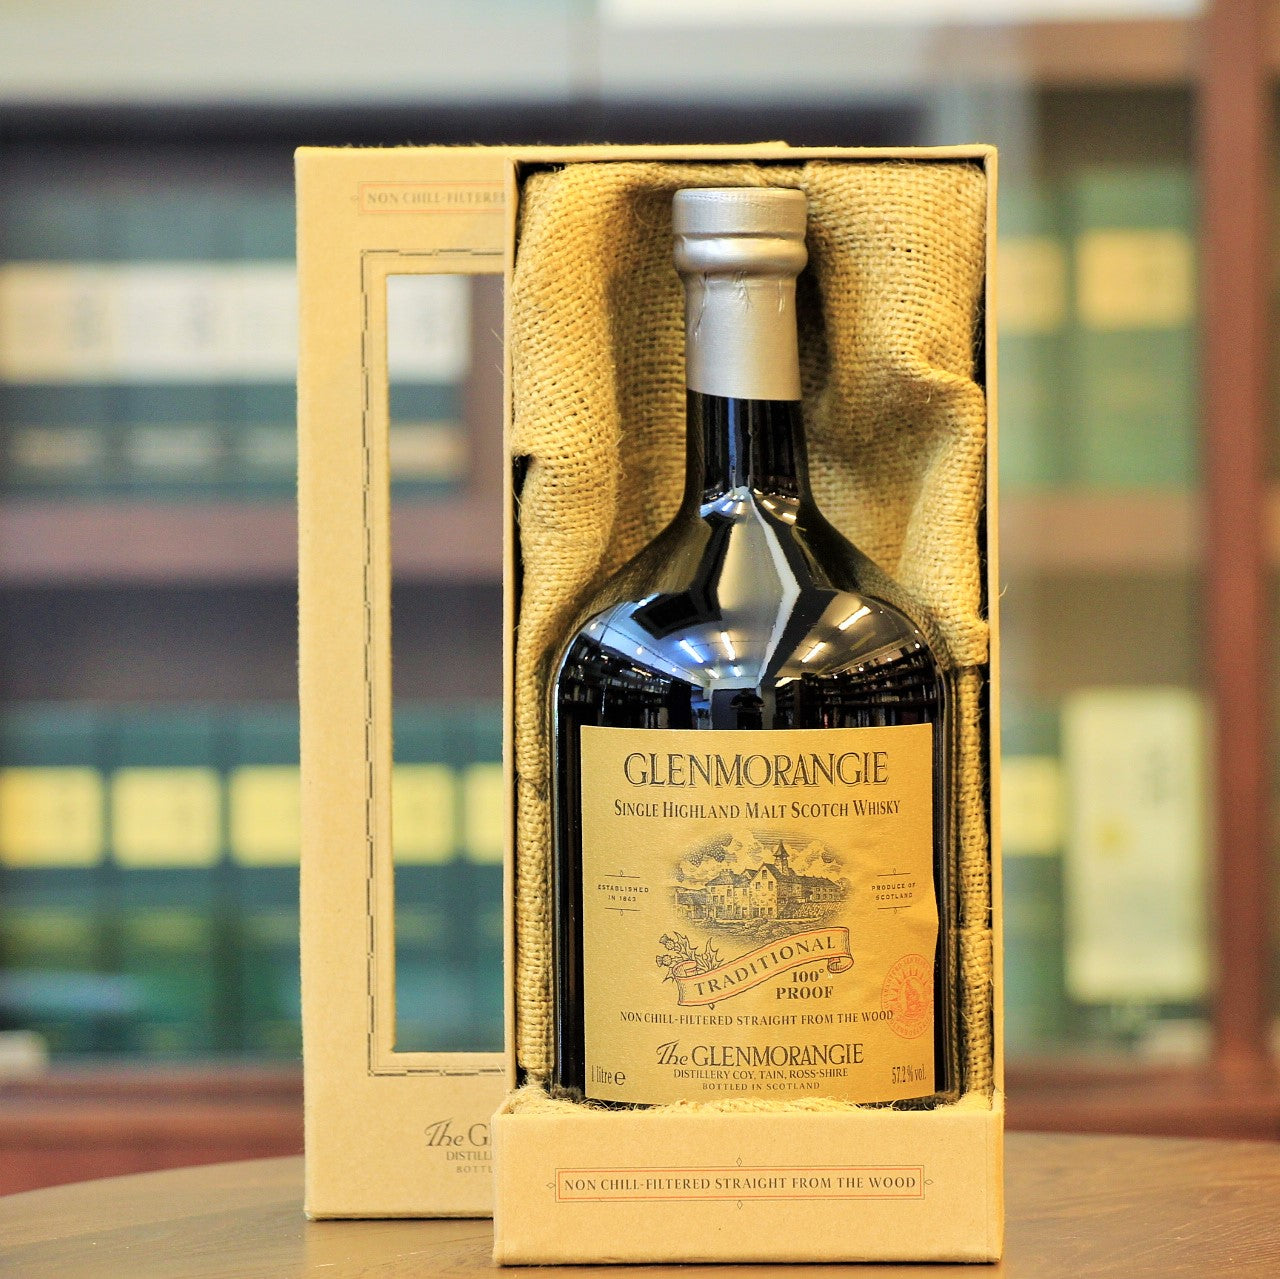 Traditional Glenmorangie Single Malt Whisky bottled at an umpressive ABV of 57.2%. Now available at Whisky Specialist shop Mizunara in Wong Chuk Hang